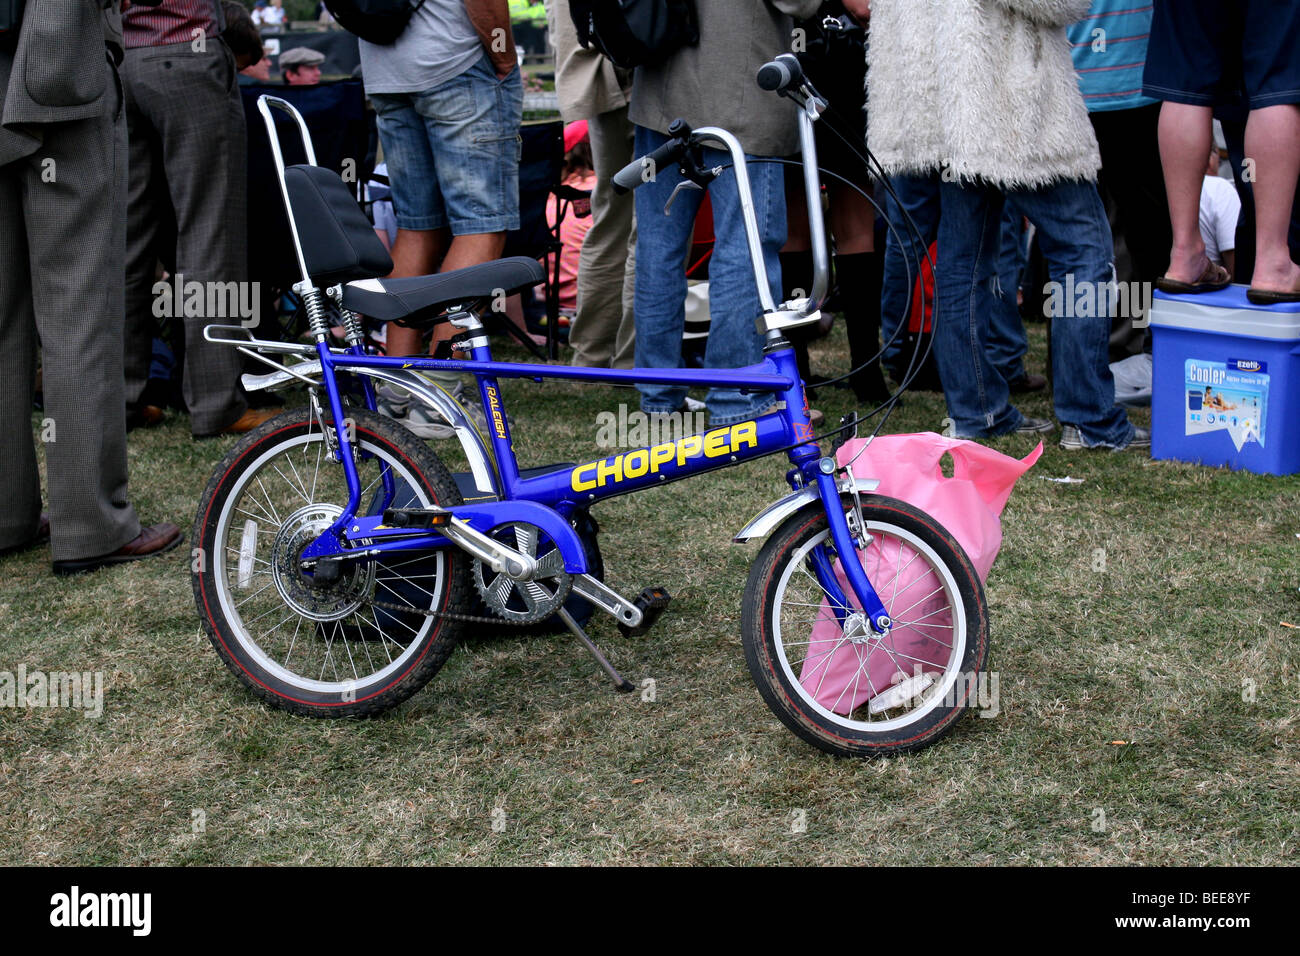 The Raleigh Chopper took the youth market by storm in the 70s Stock Photo